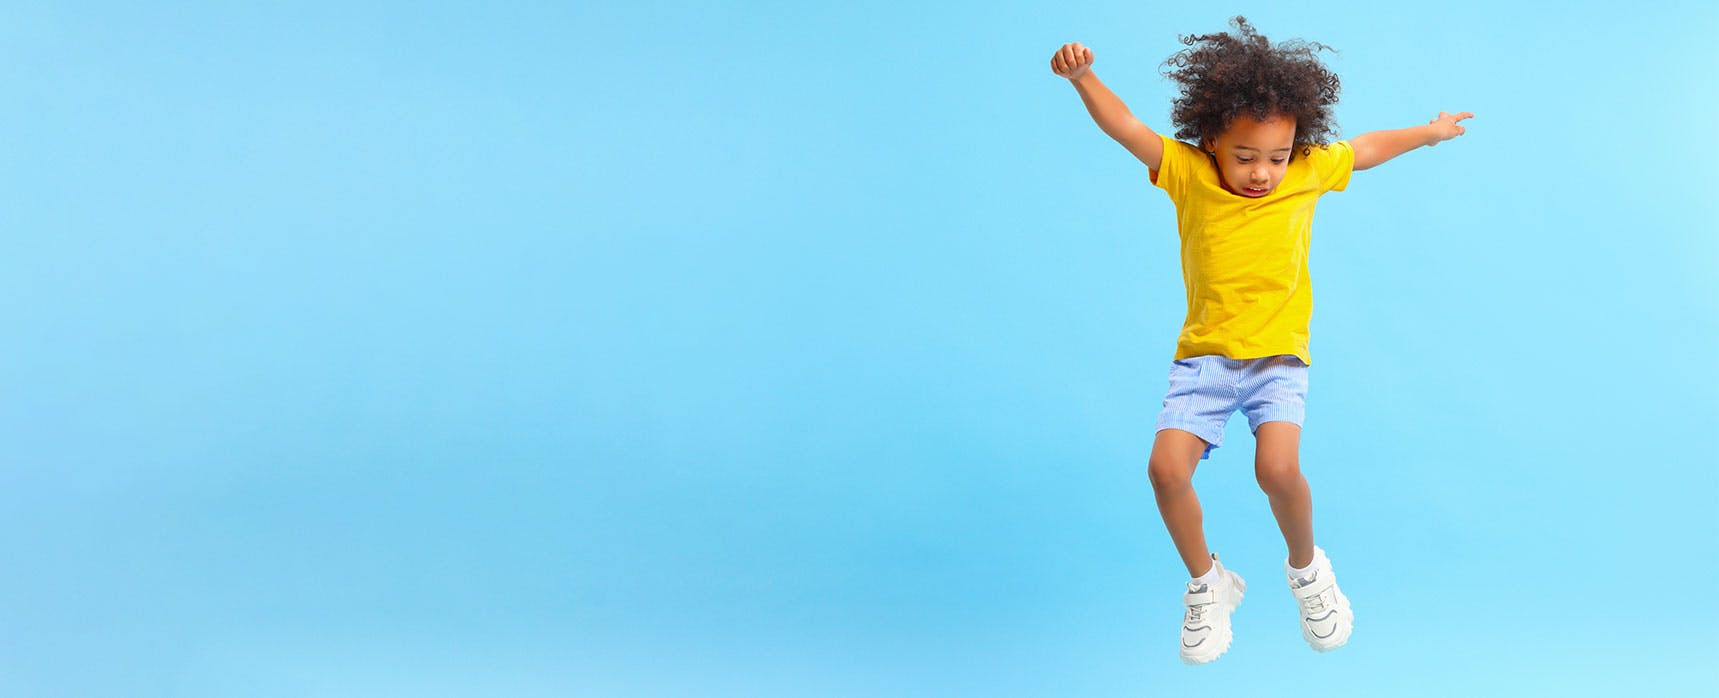 Female child jumping with a bright blue backgorund